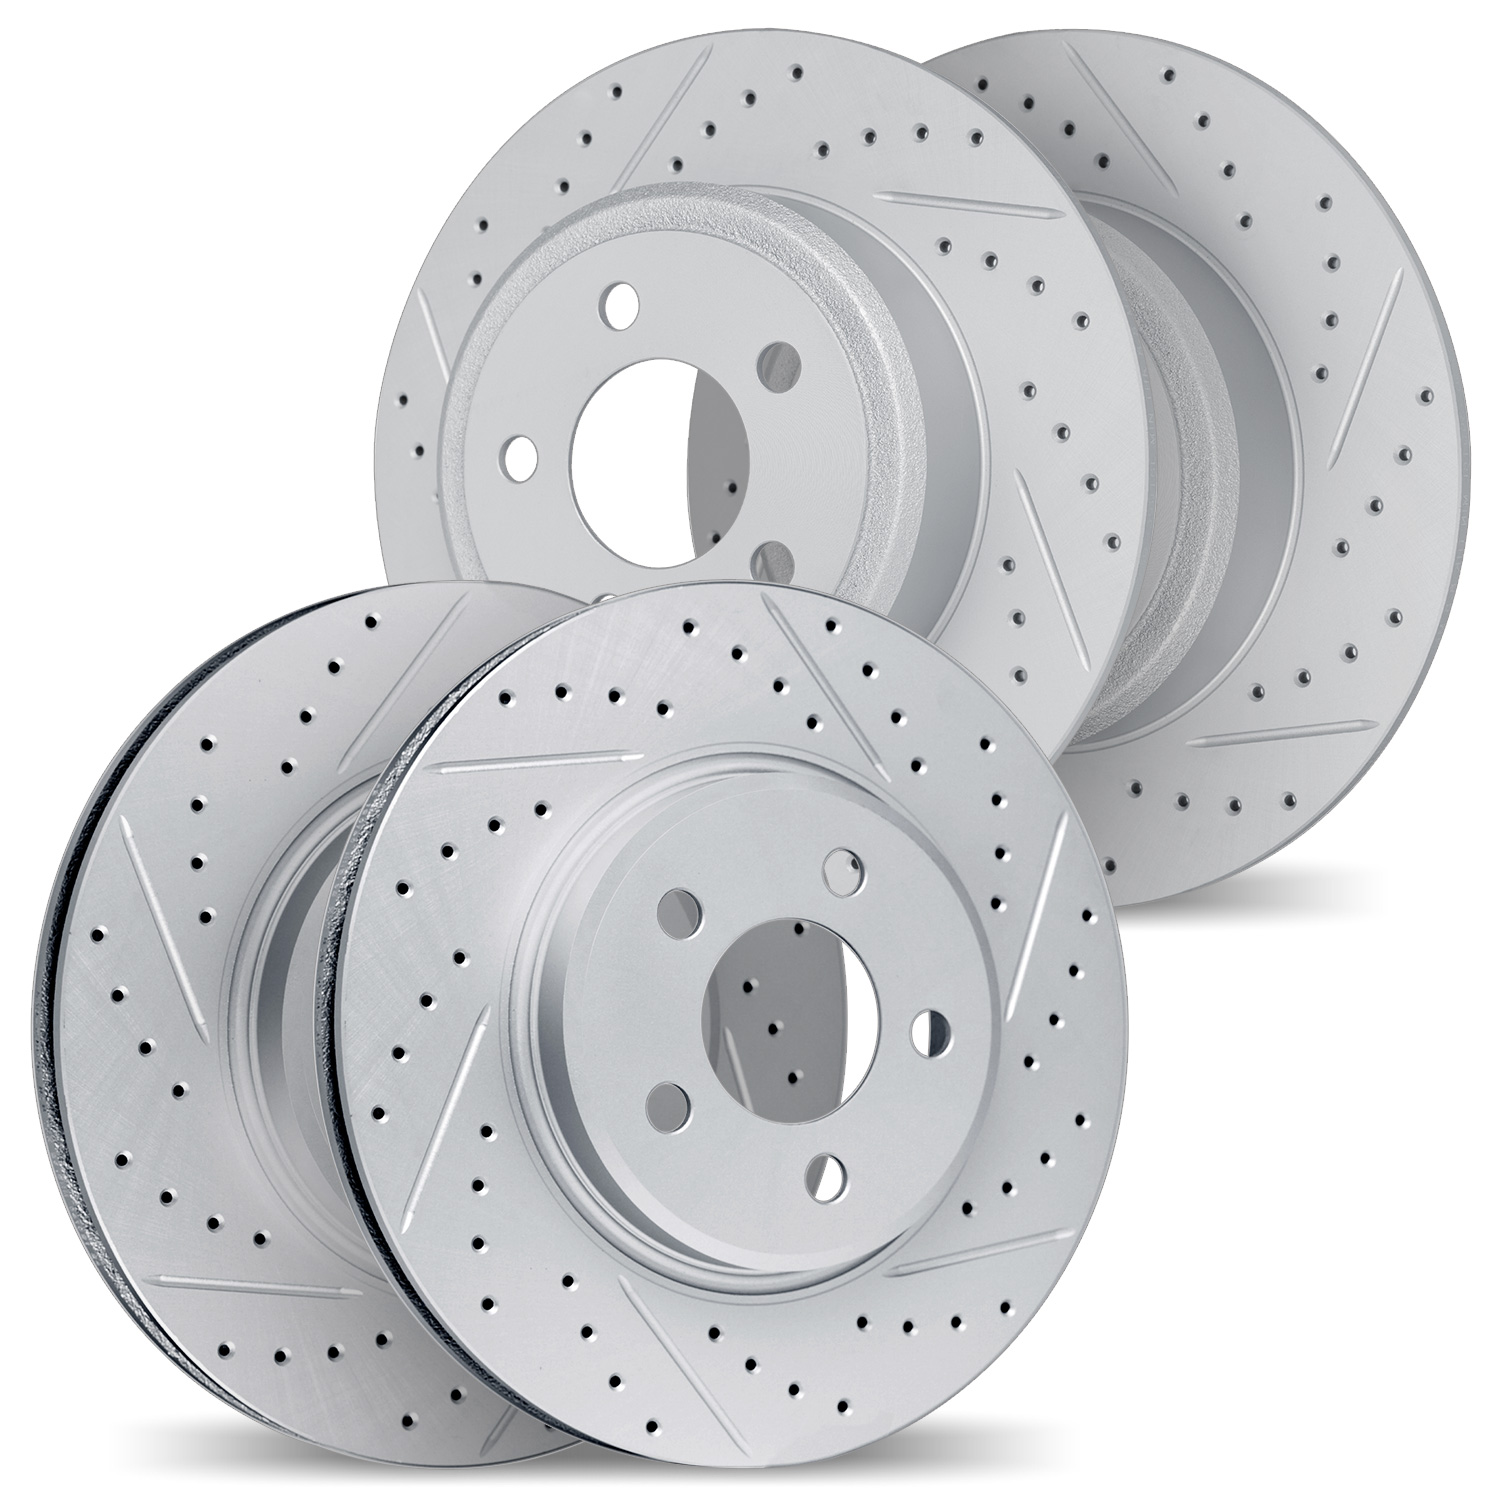 2004-65008 Geoperformance Drilled/Slotted Brake Rotors, 1999-2010 GM, Position: Front and Rear